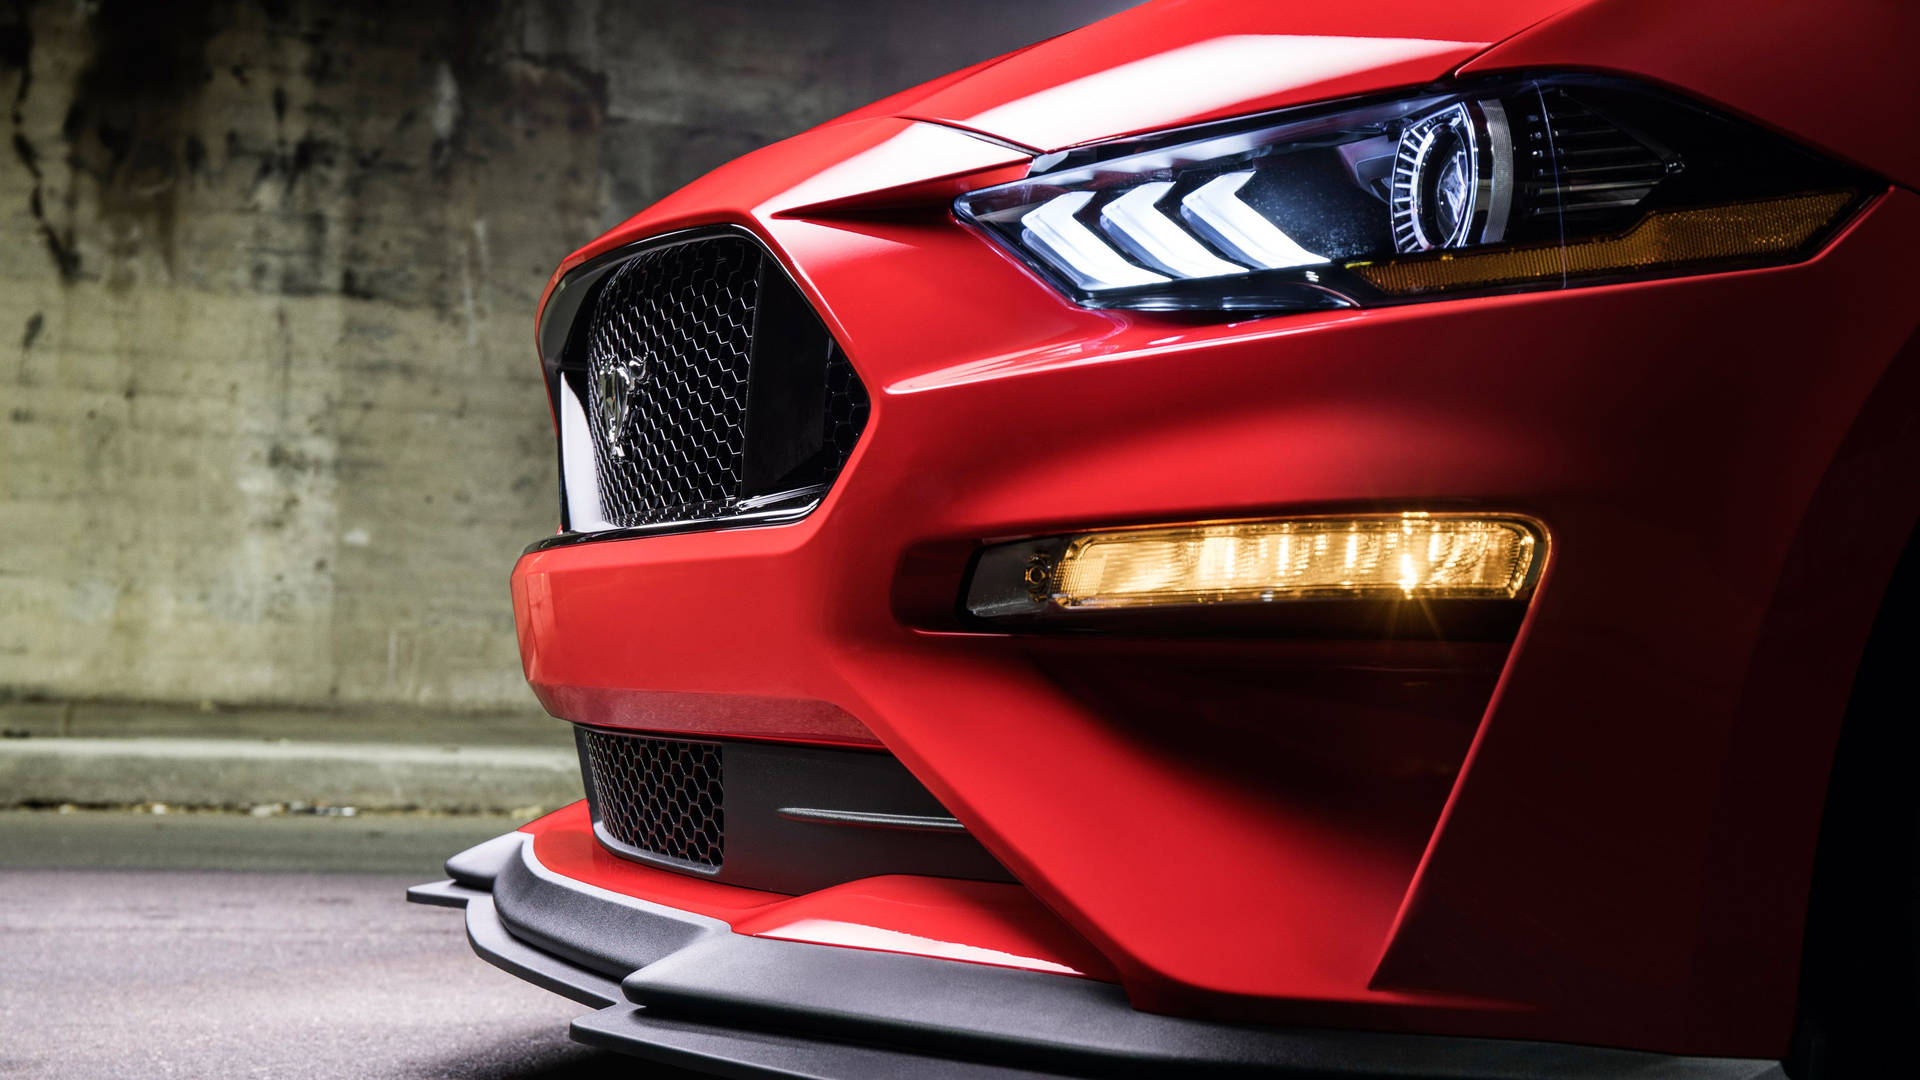 Red Ford Mustang Gt Background